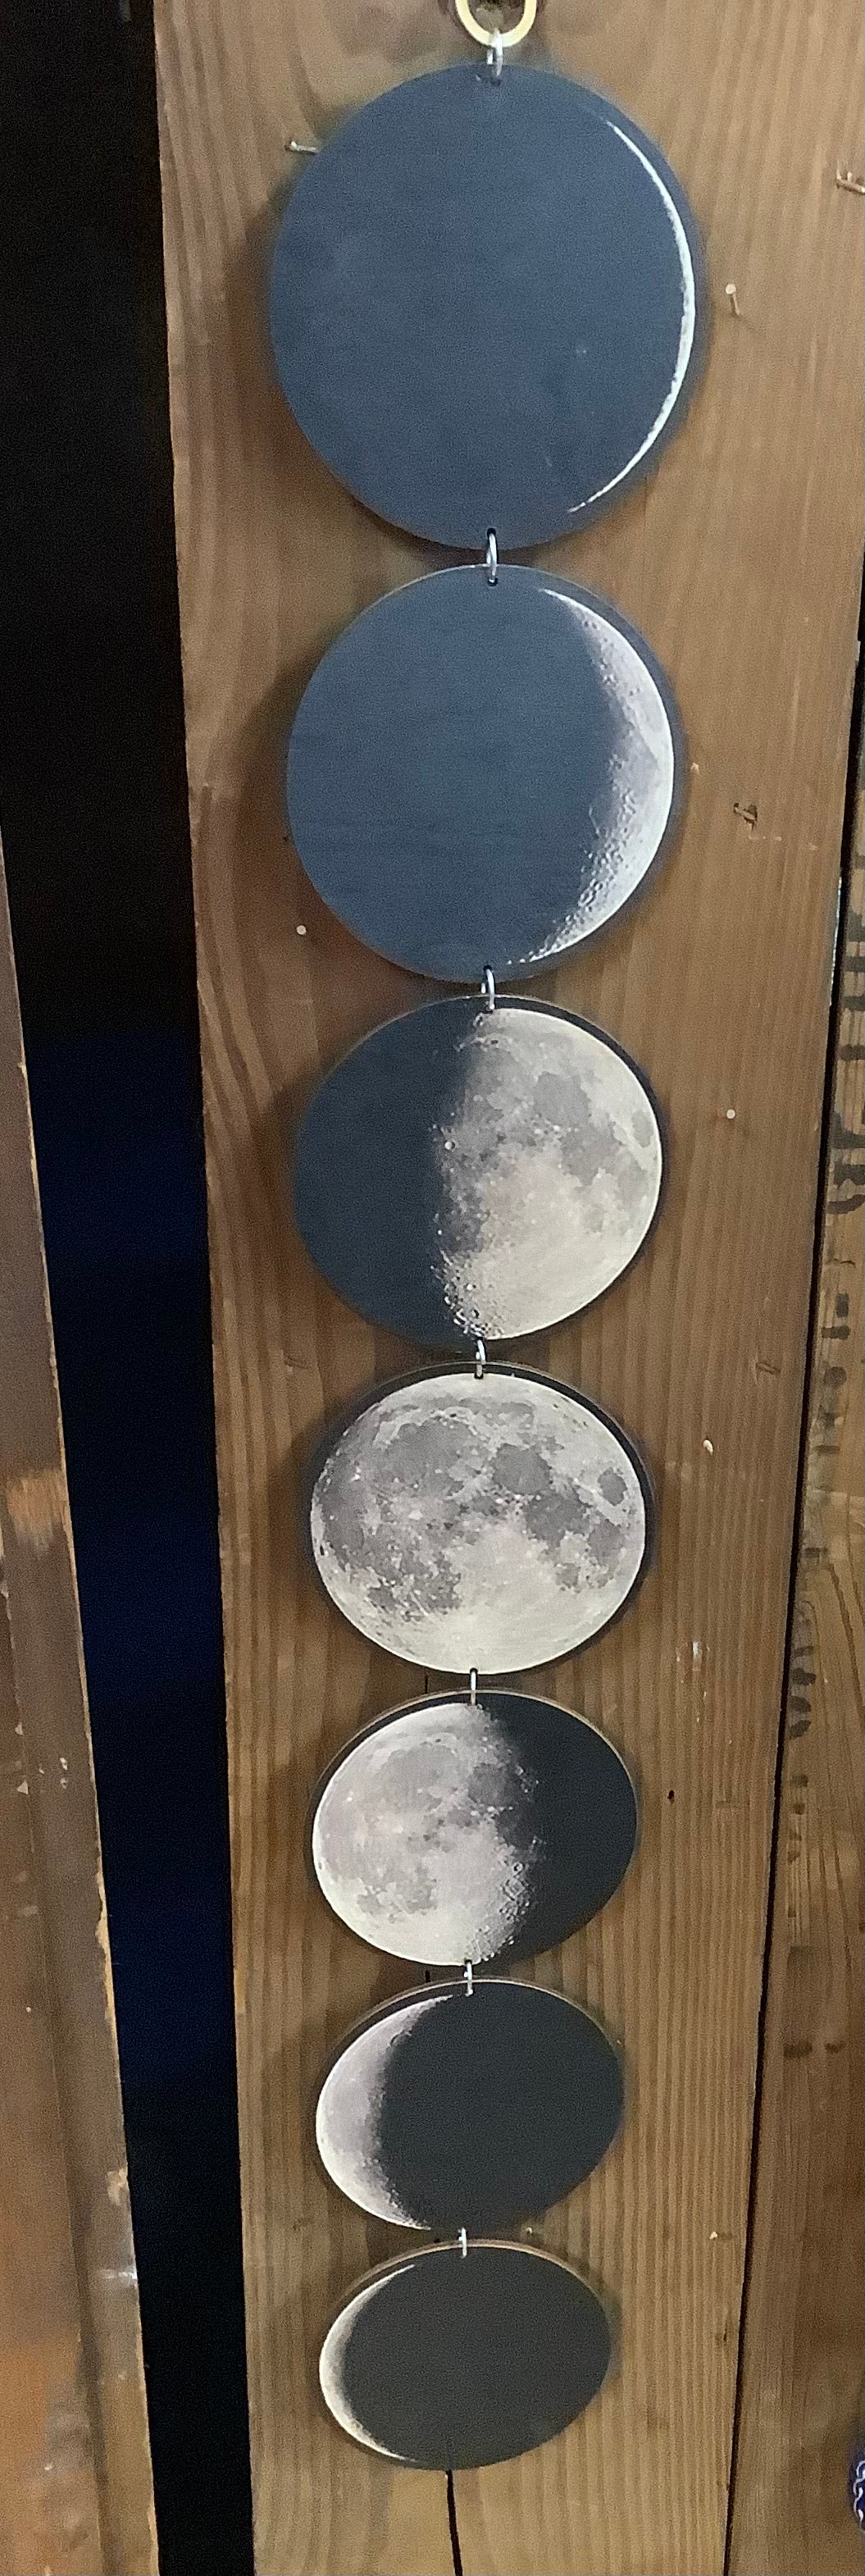 Most amazing moon phases